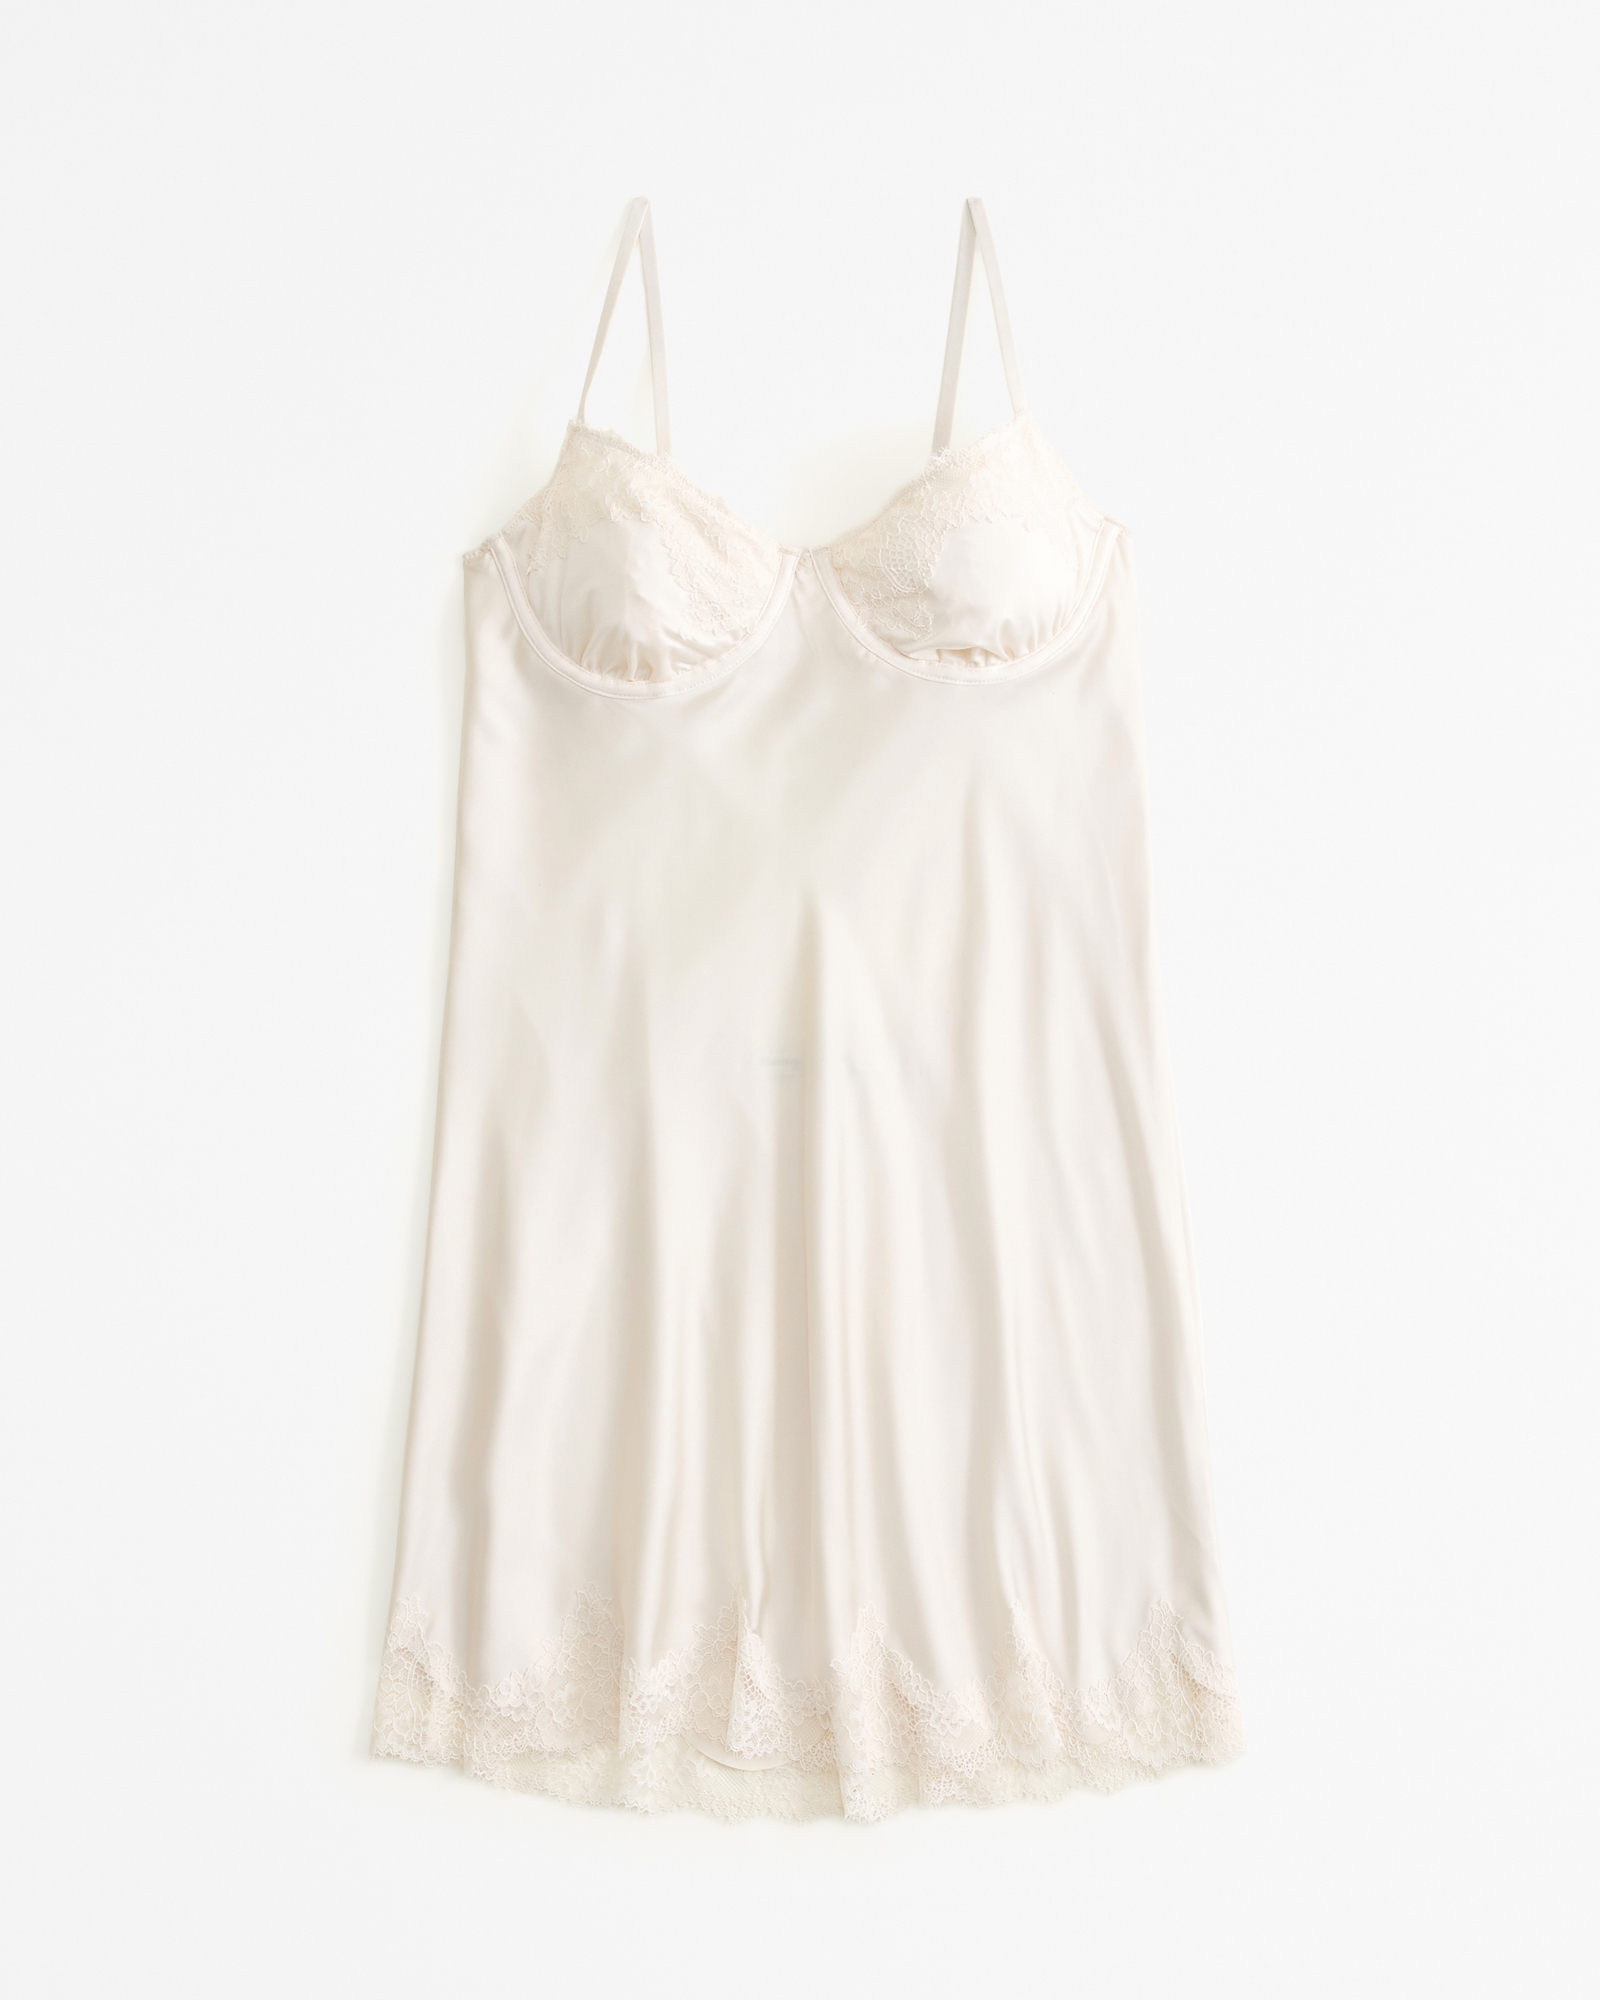 Abercrombie & Fitch silky satin/lace button front cream dressy